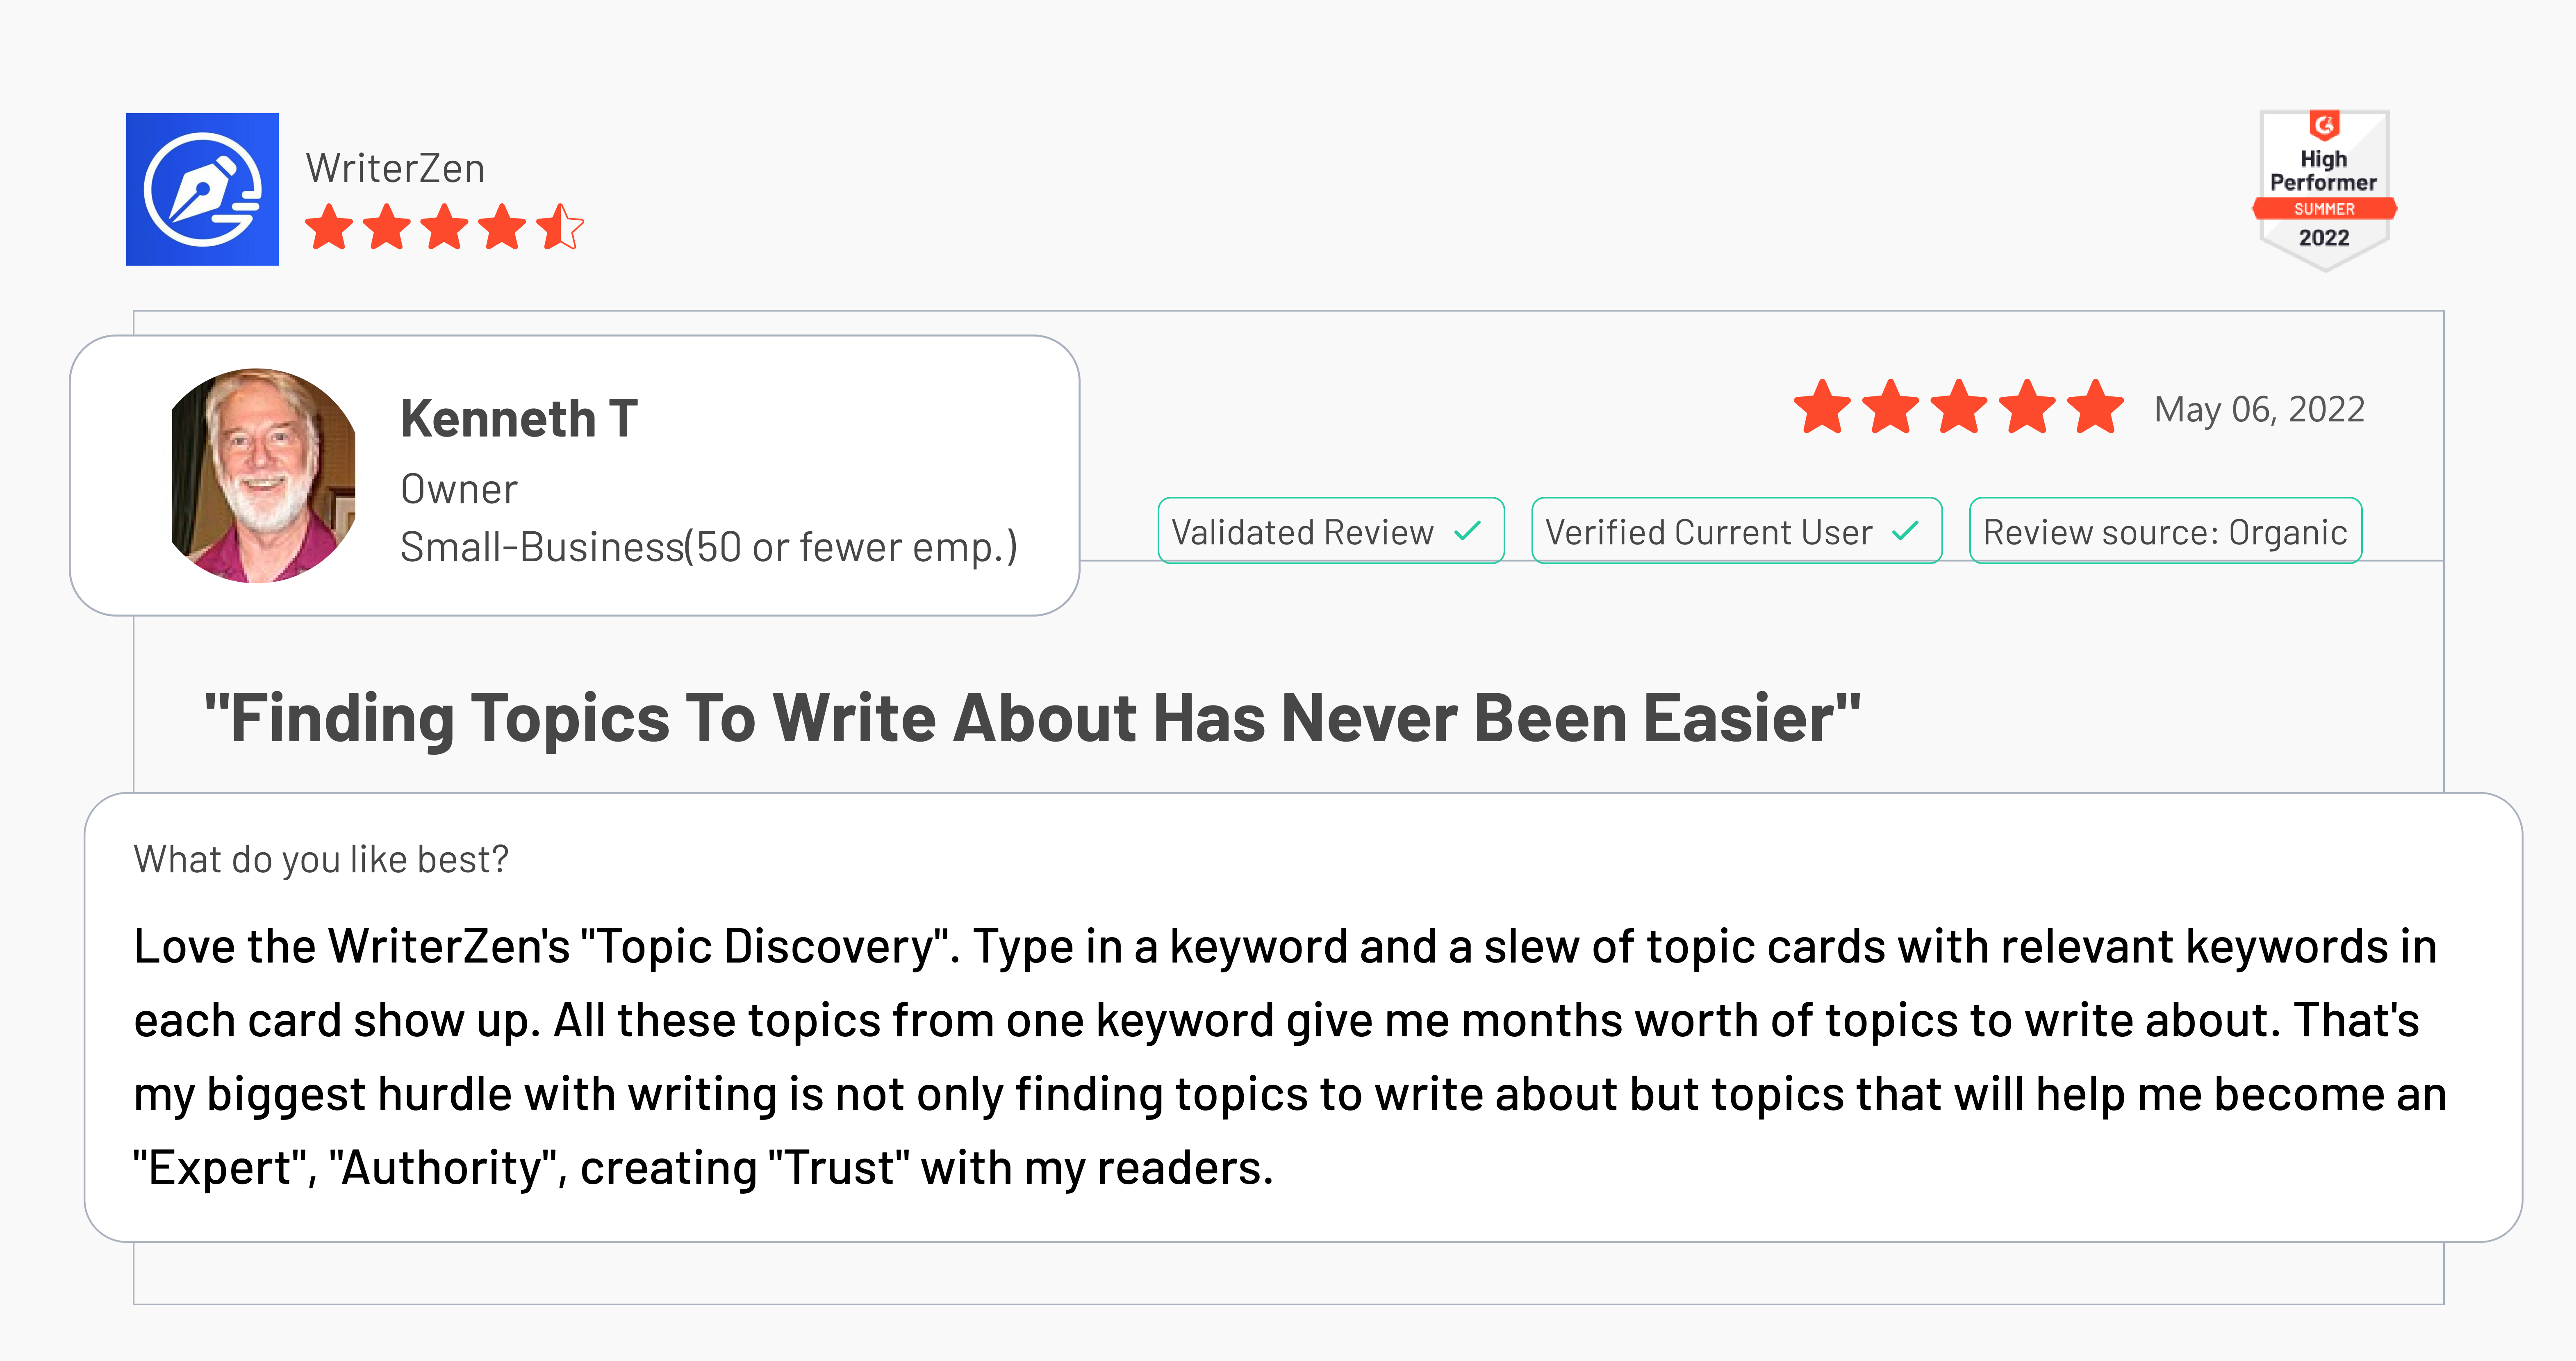 Positive Feedback From User After Using Topic Discovery